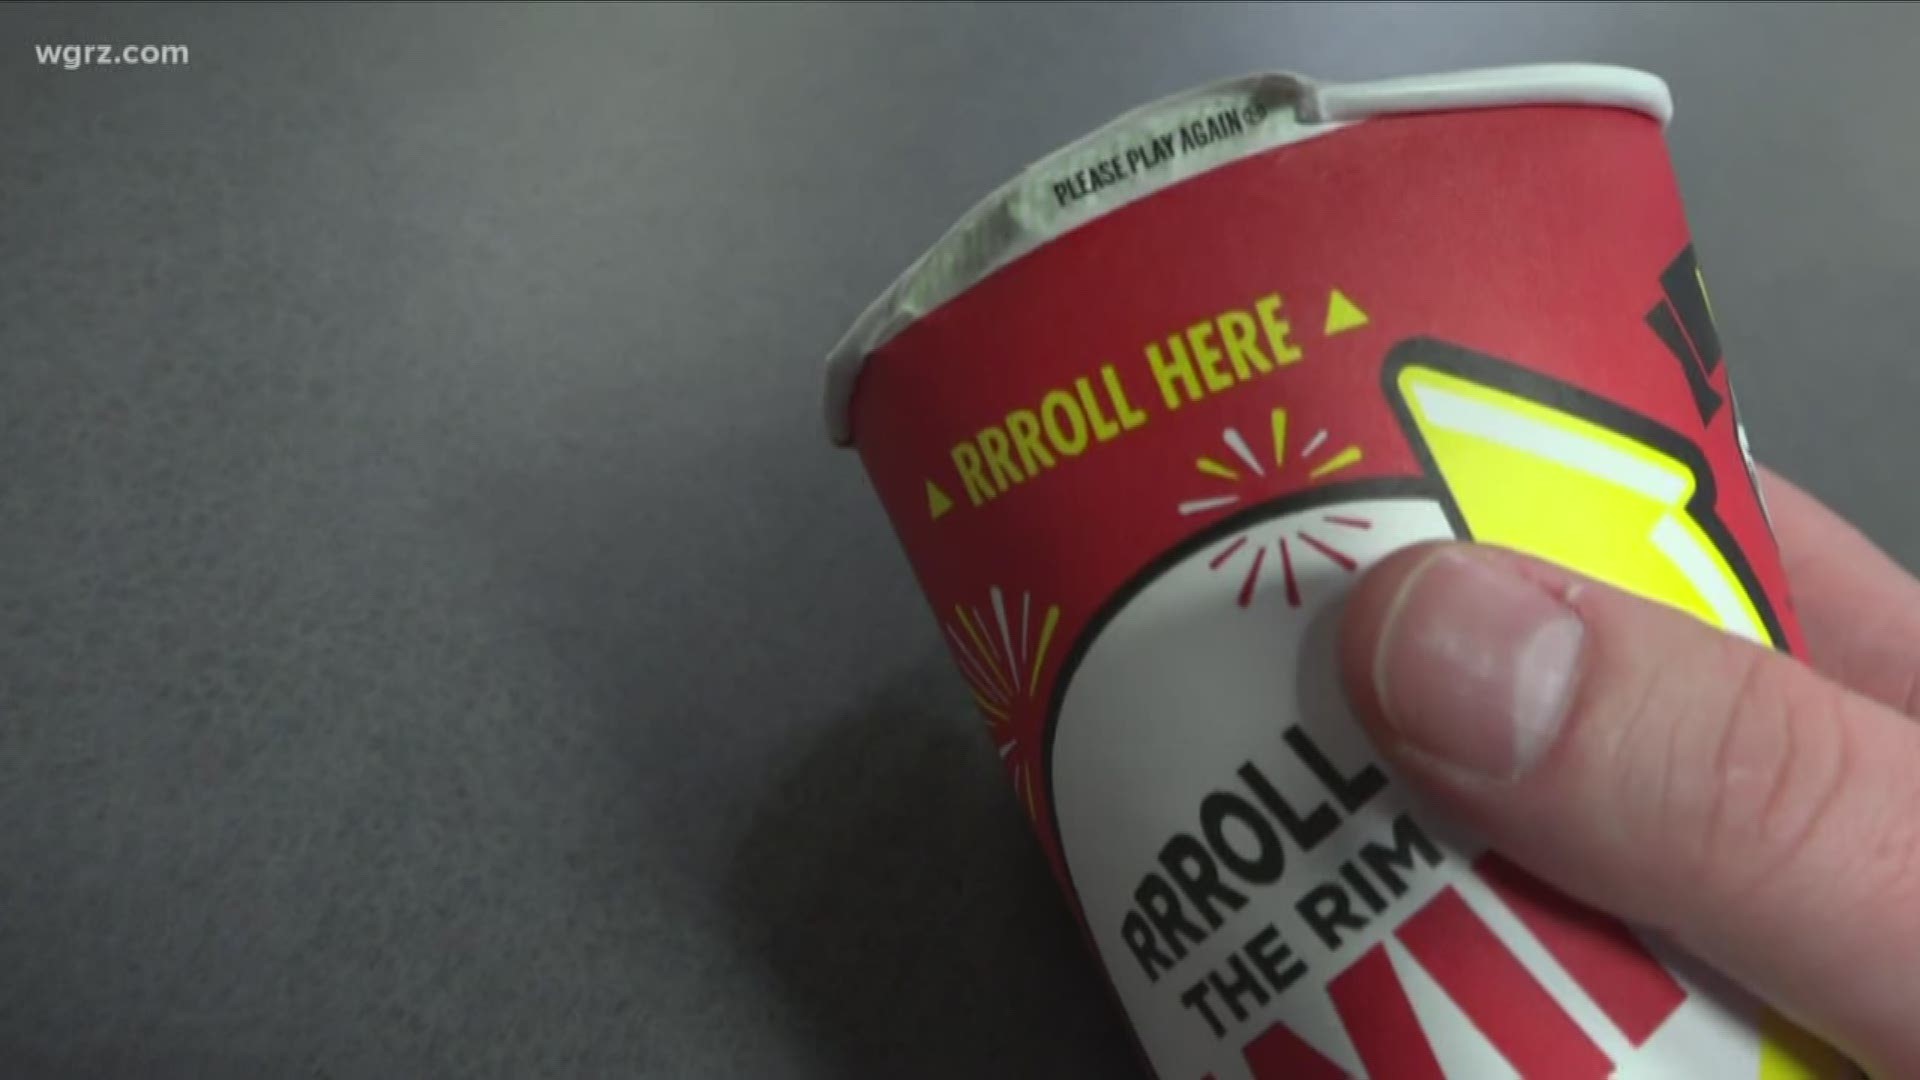 Tim Horton's announced they will not be using paper "roll up the rim" cups in light of current public health concerns.